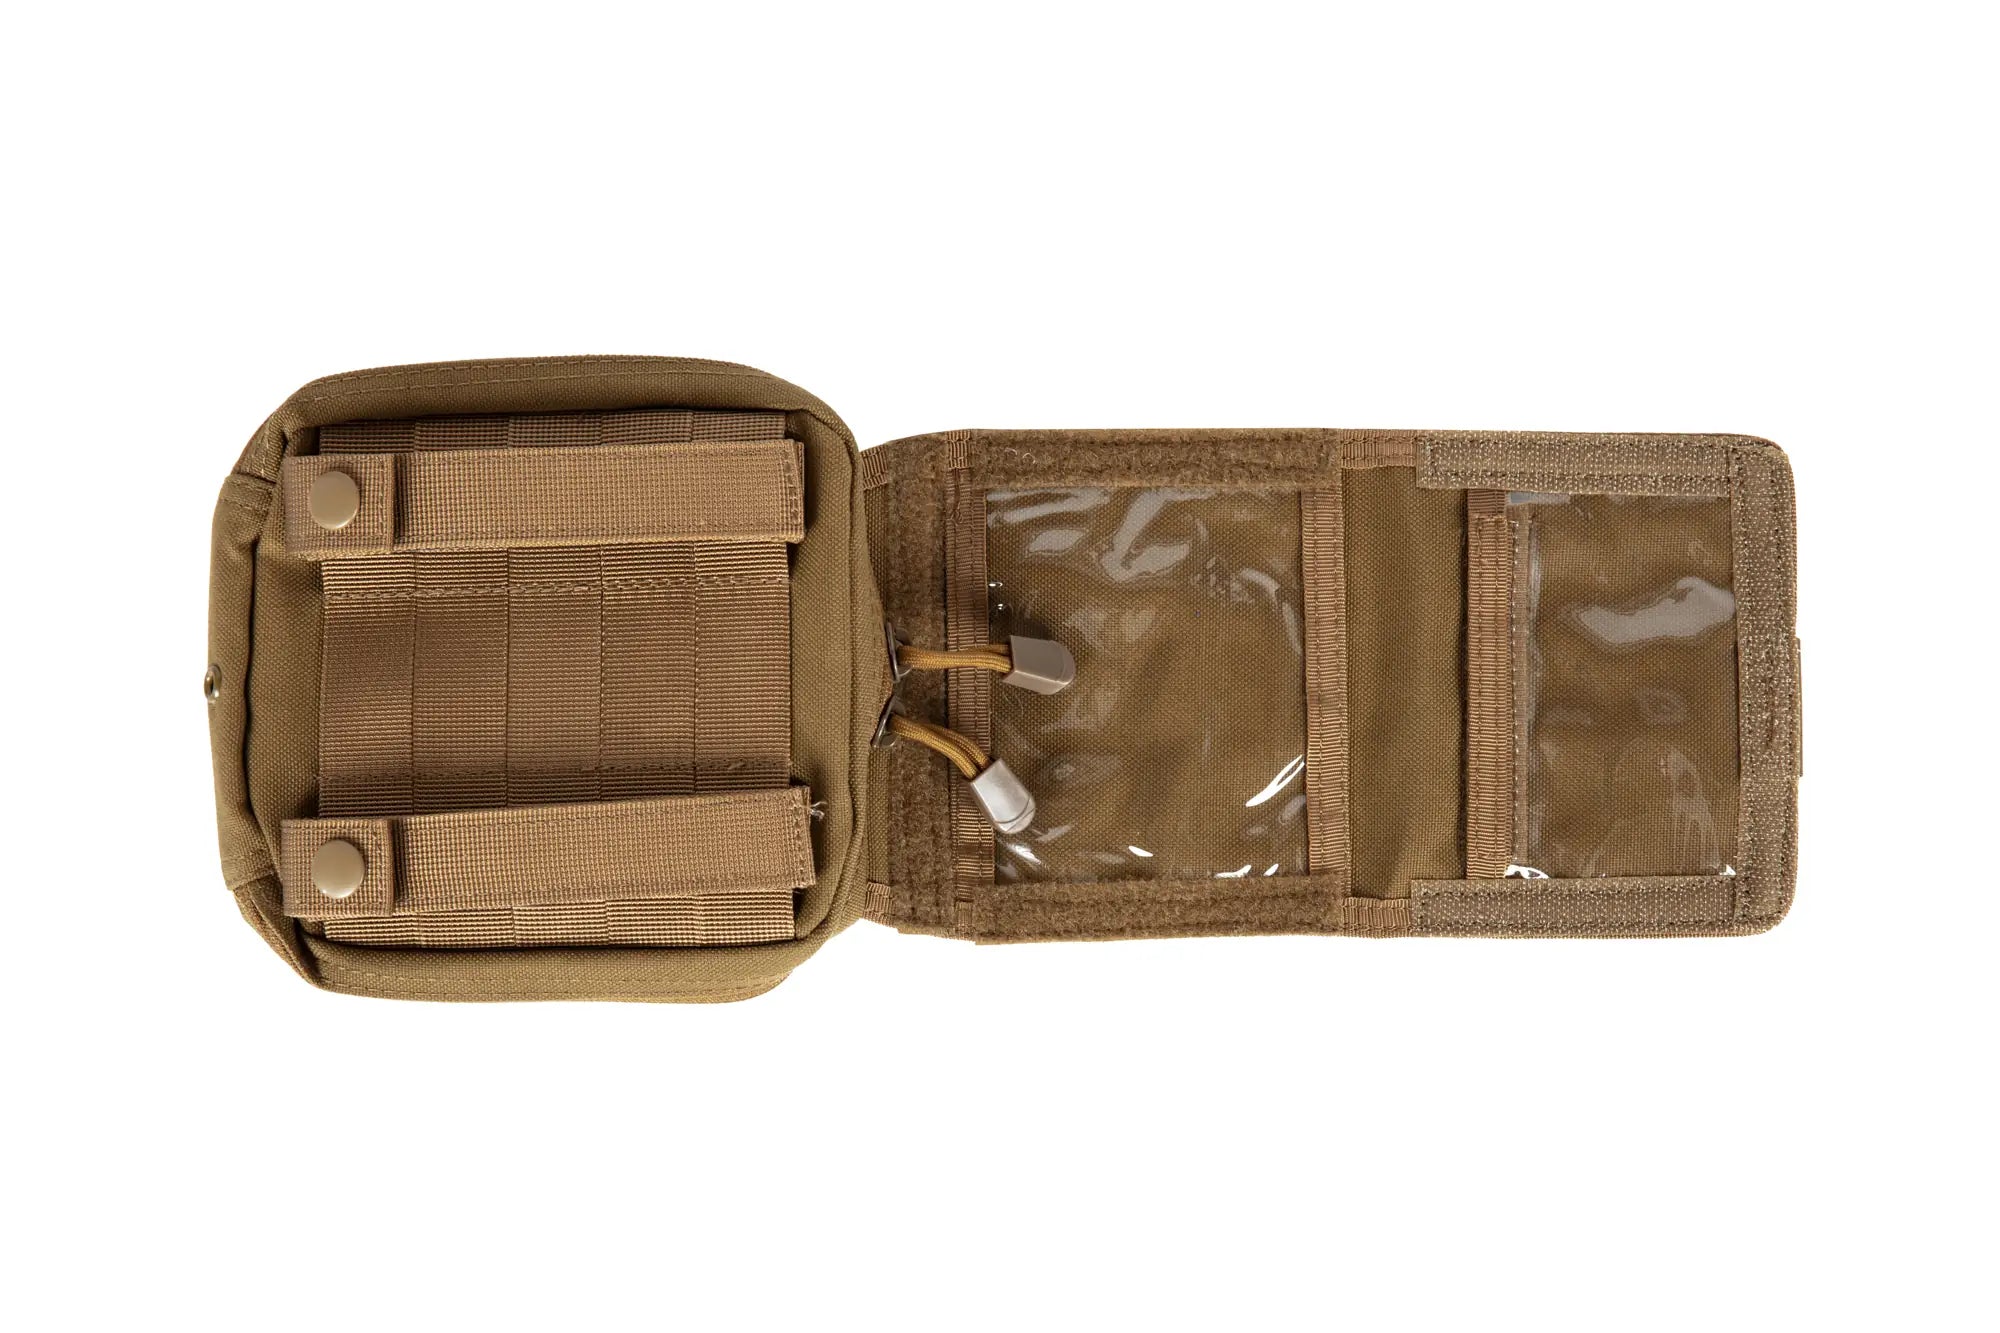 Administrative Panel with Map Pouch - Tan-6